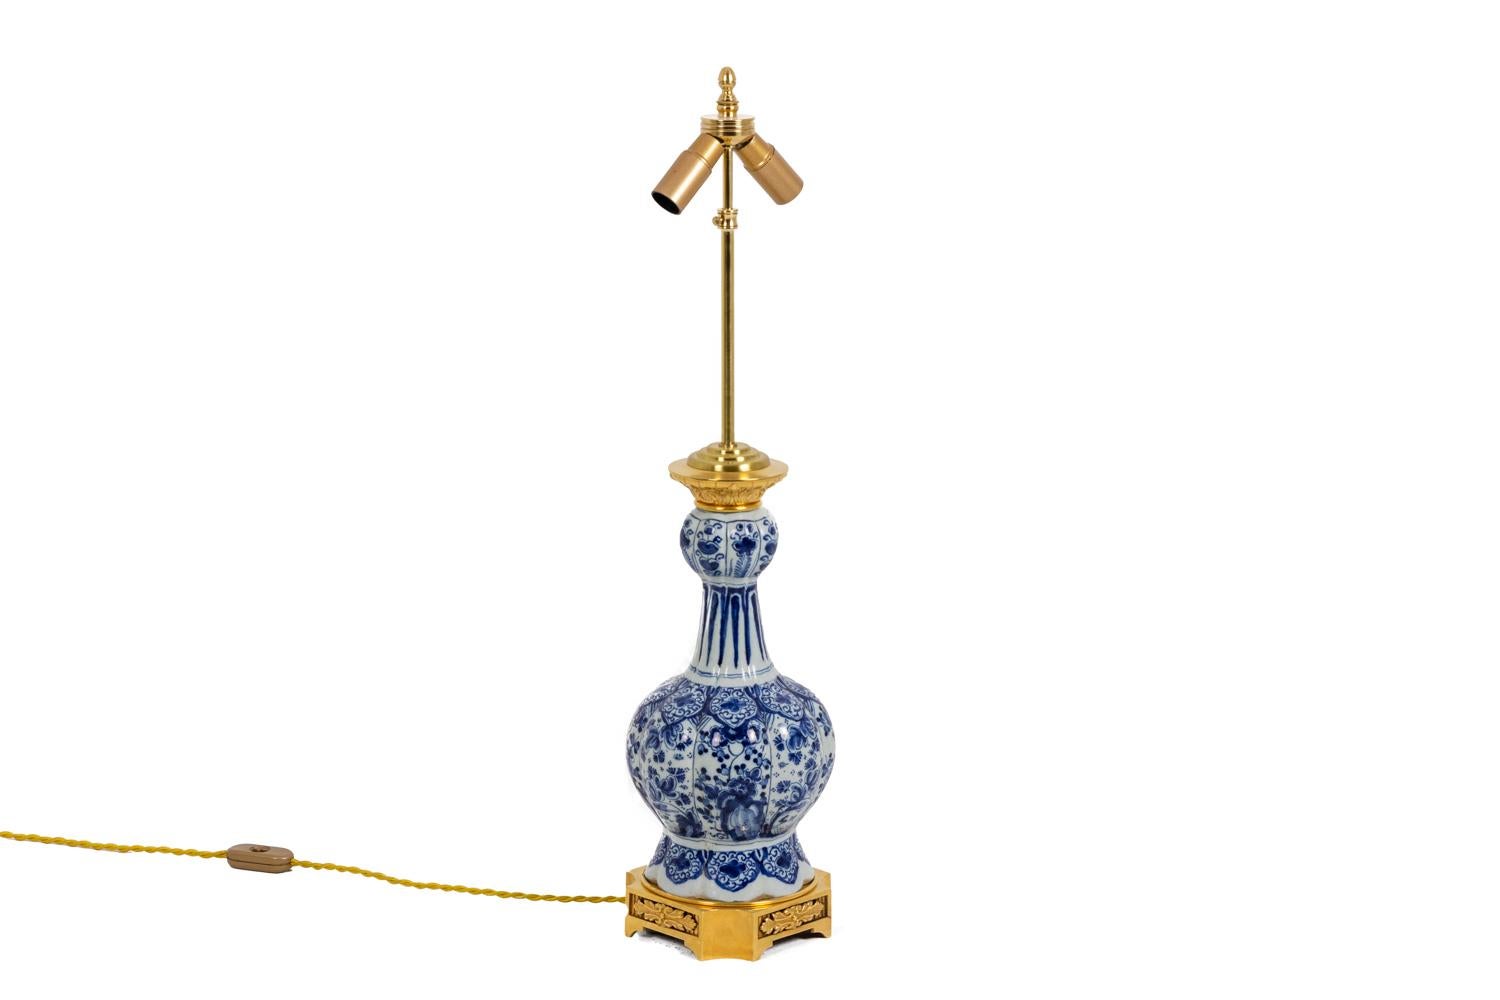 Baluster shape lamp in blue and white Delft earthenware adorned with flowers and foliages Paunch of gadroons supporting a ball adorned with flowers. Mount in chiseled and gilt bronze. Quadripod cut base and adorned with foliages in grooved bottom